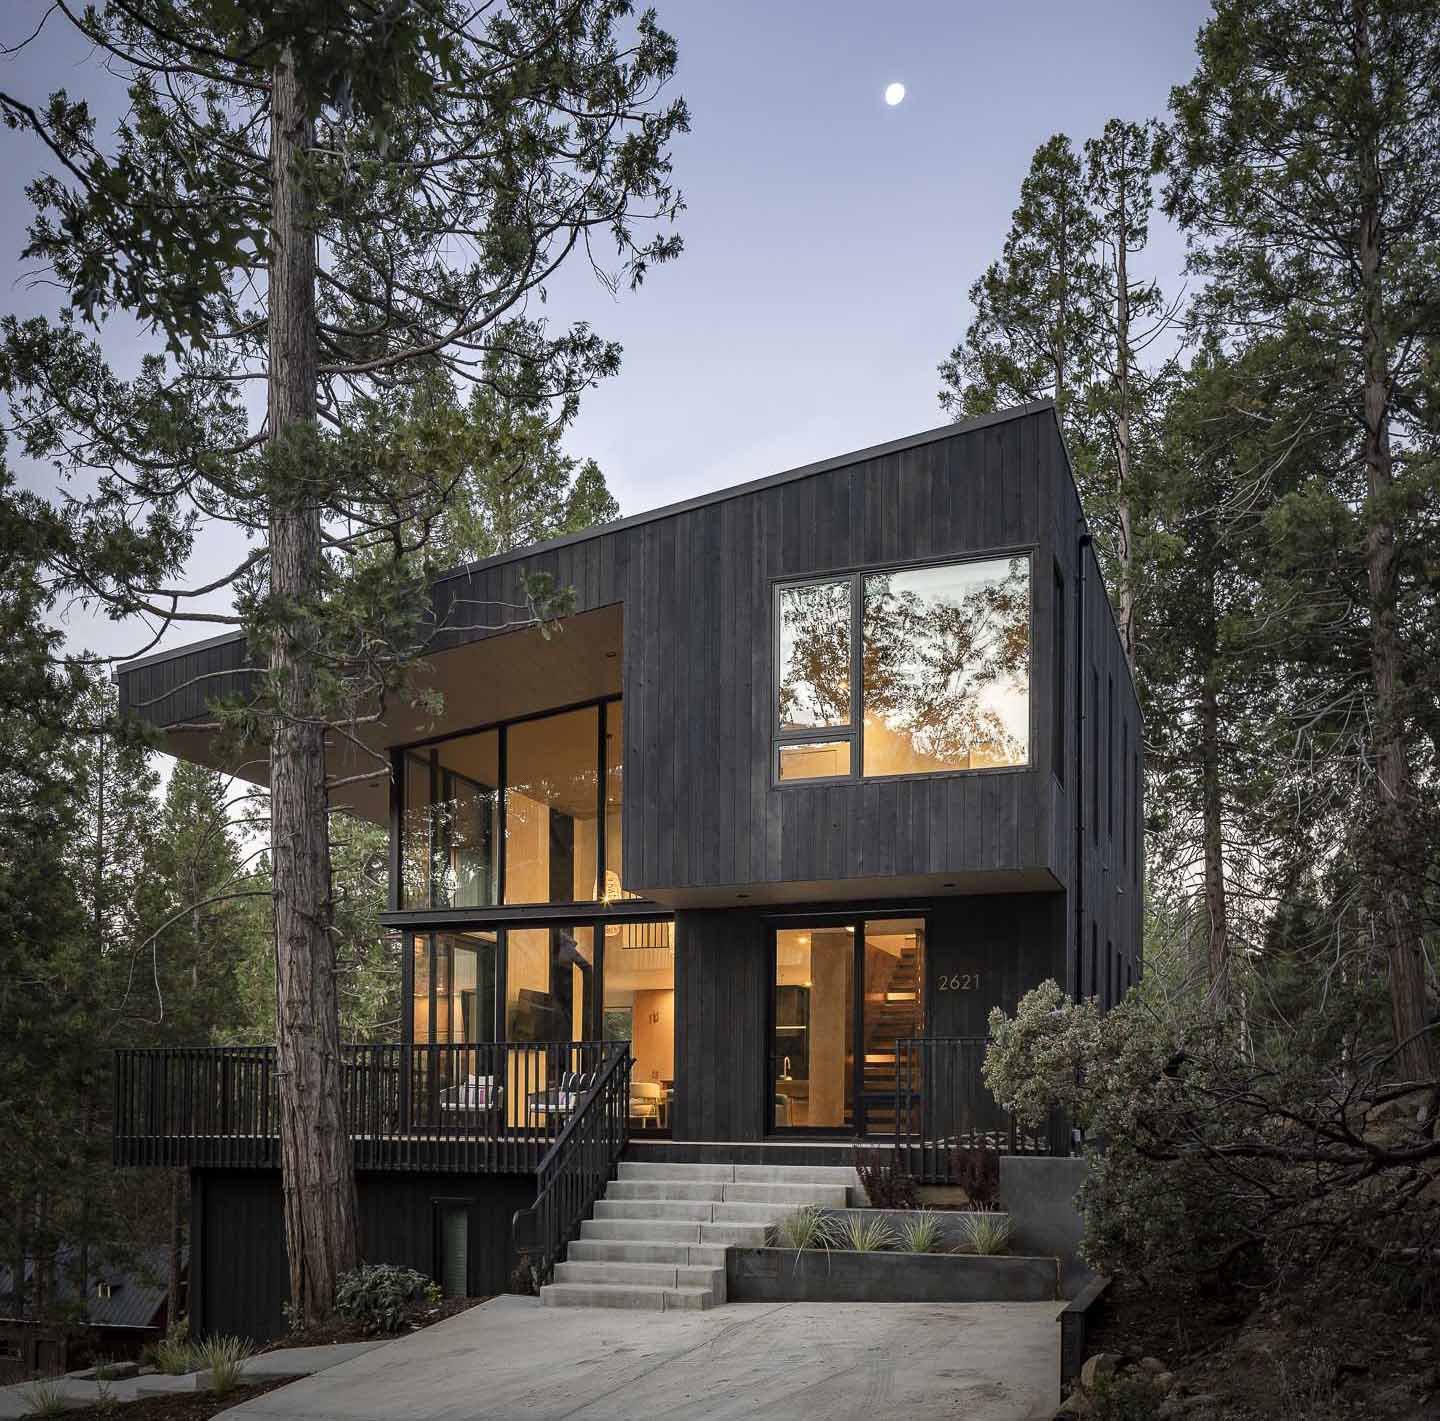 Dark vertical wood siding was chosen as the primary exterior cladding to “camouflage” this home and allow it to blend into the environment as much as possible.